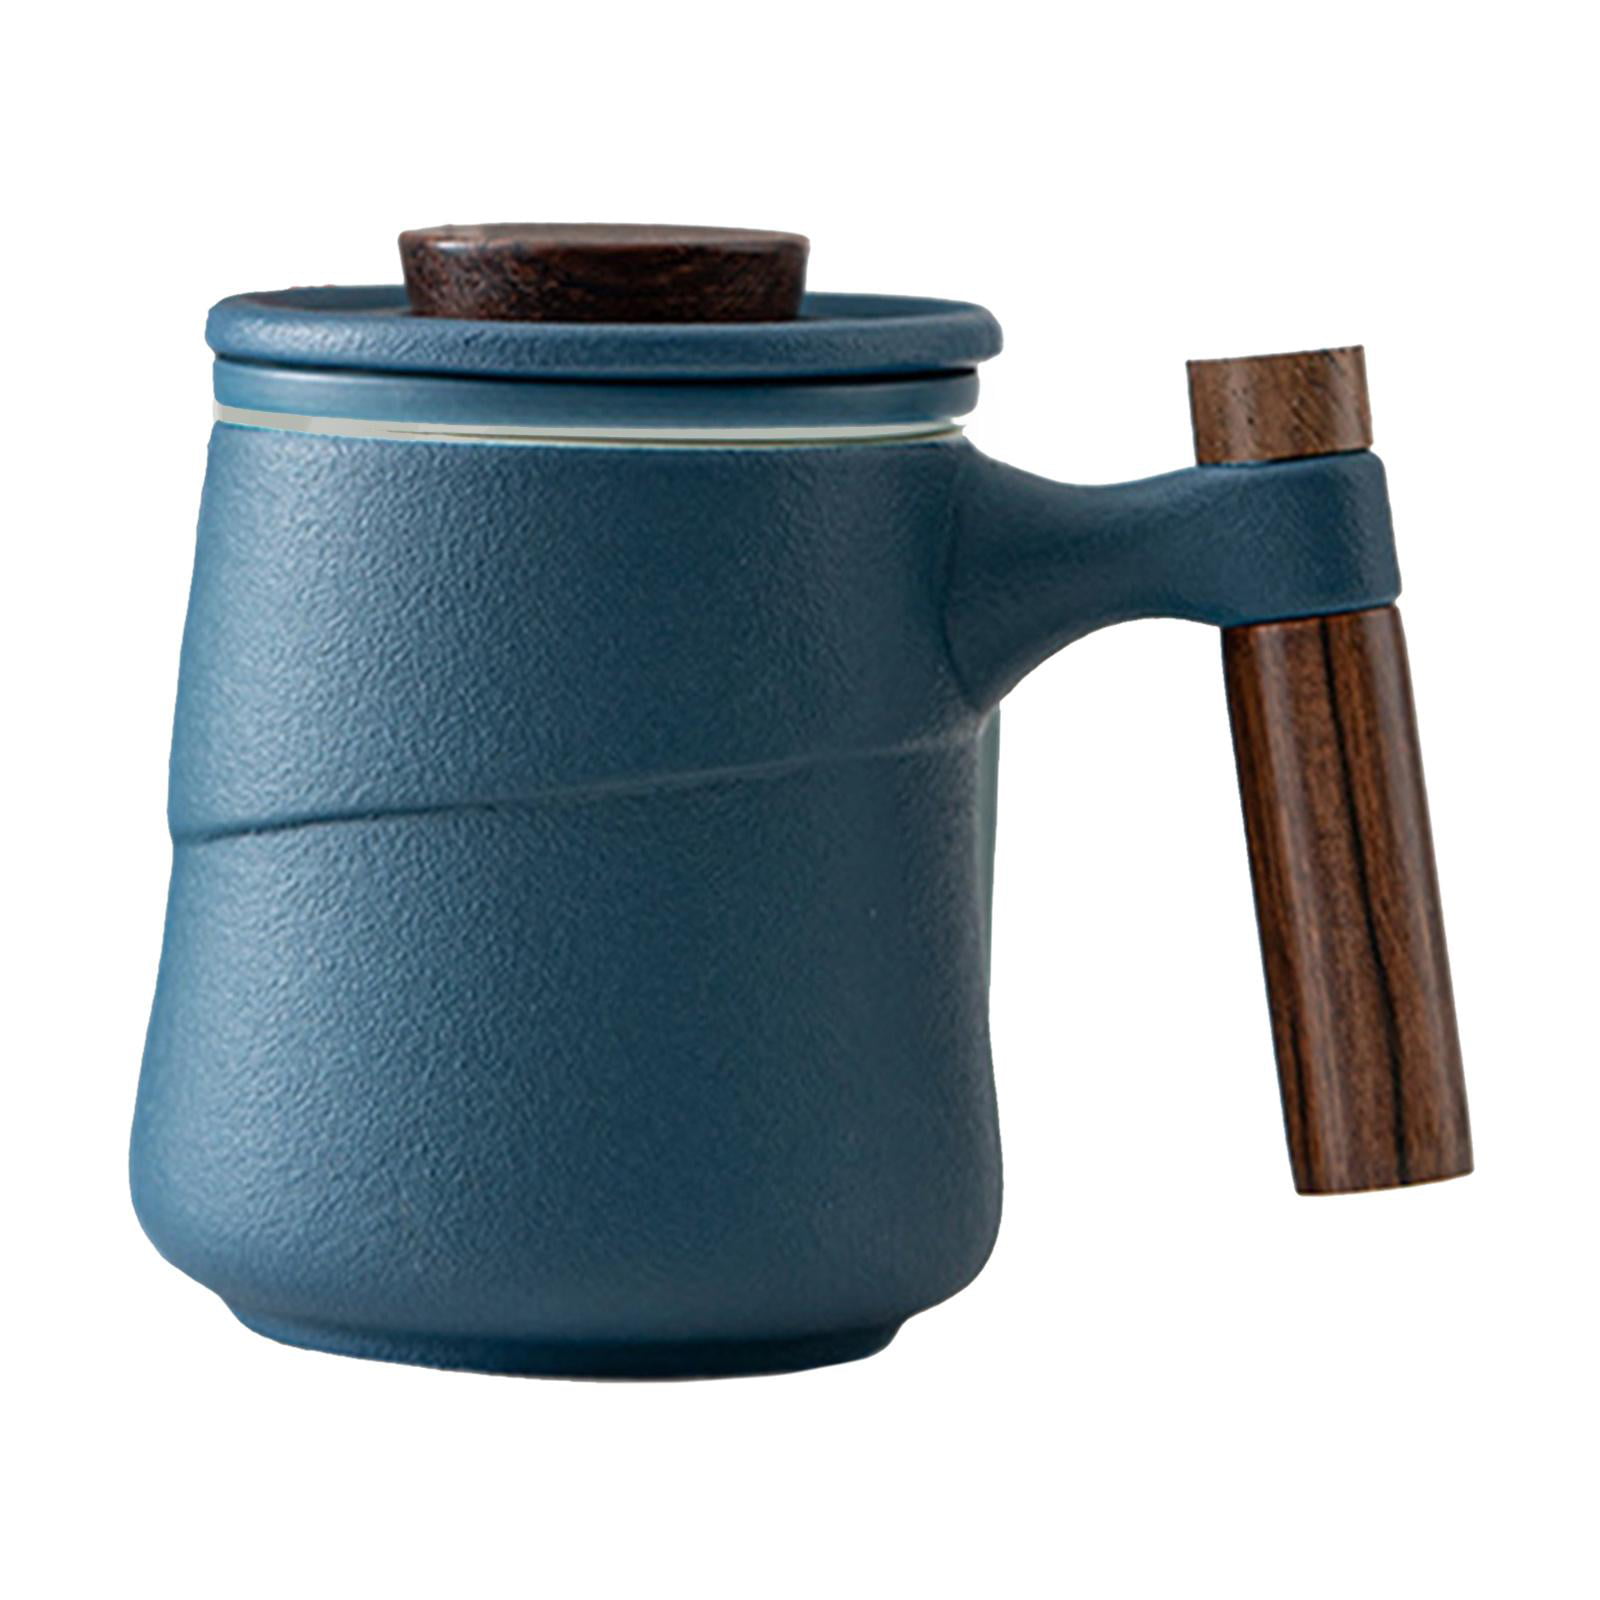 Ceramic Tea Mug with Lid Tea Cup with Infuser and Lid Infuser Blue 15 oz 